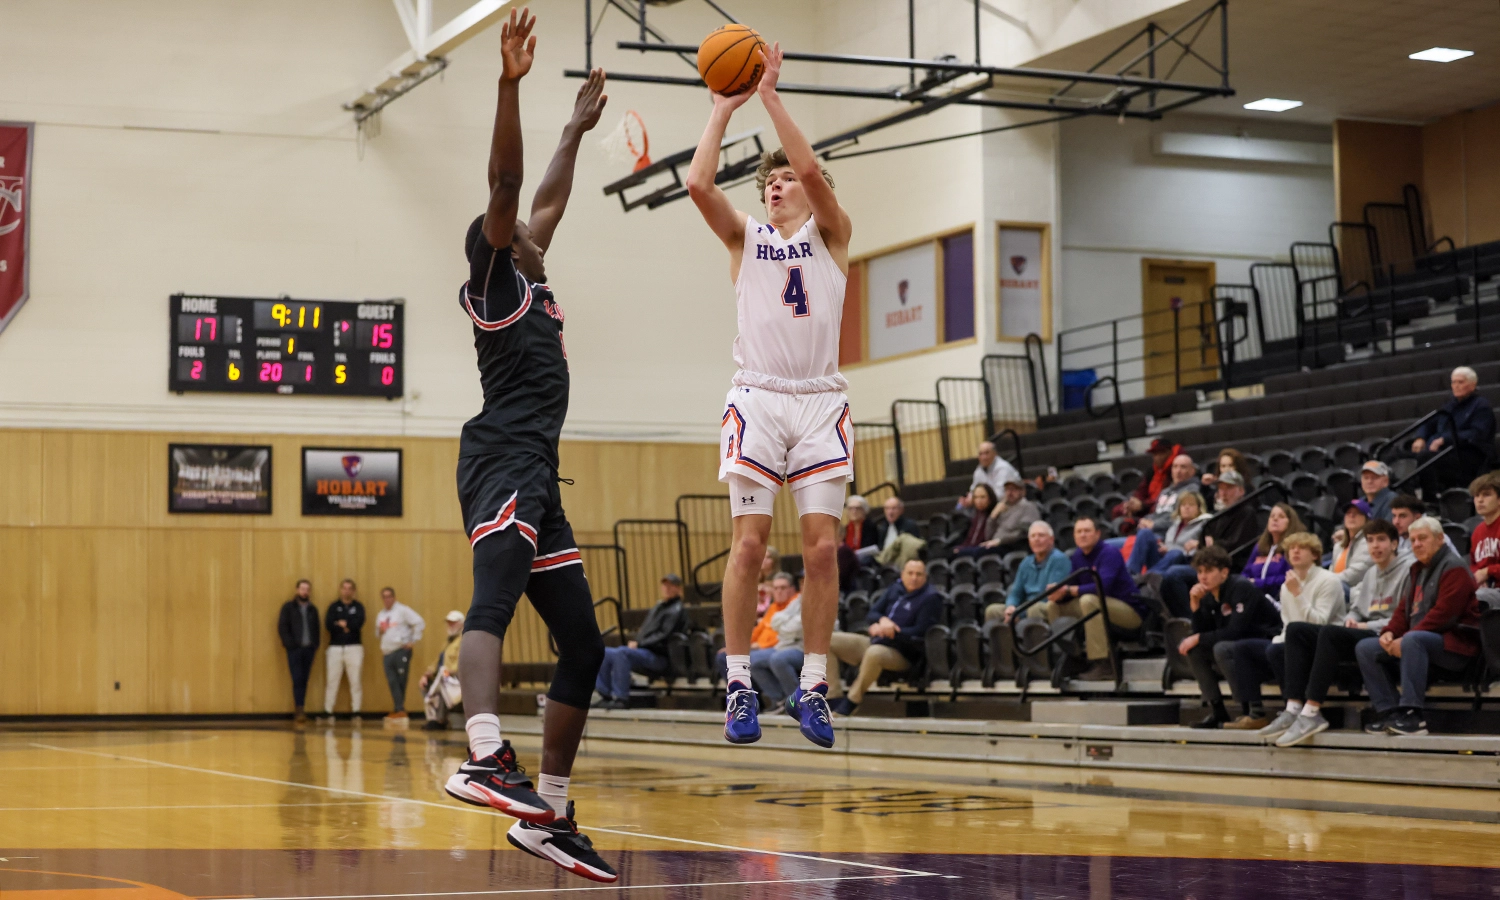 Alex Moesch ’27 launches a jumper over a Wells defender. He finished the contest with a game-high 18 points as the Hobart basketball team improved to 8-0 on the season.